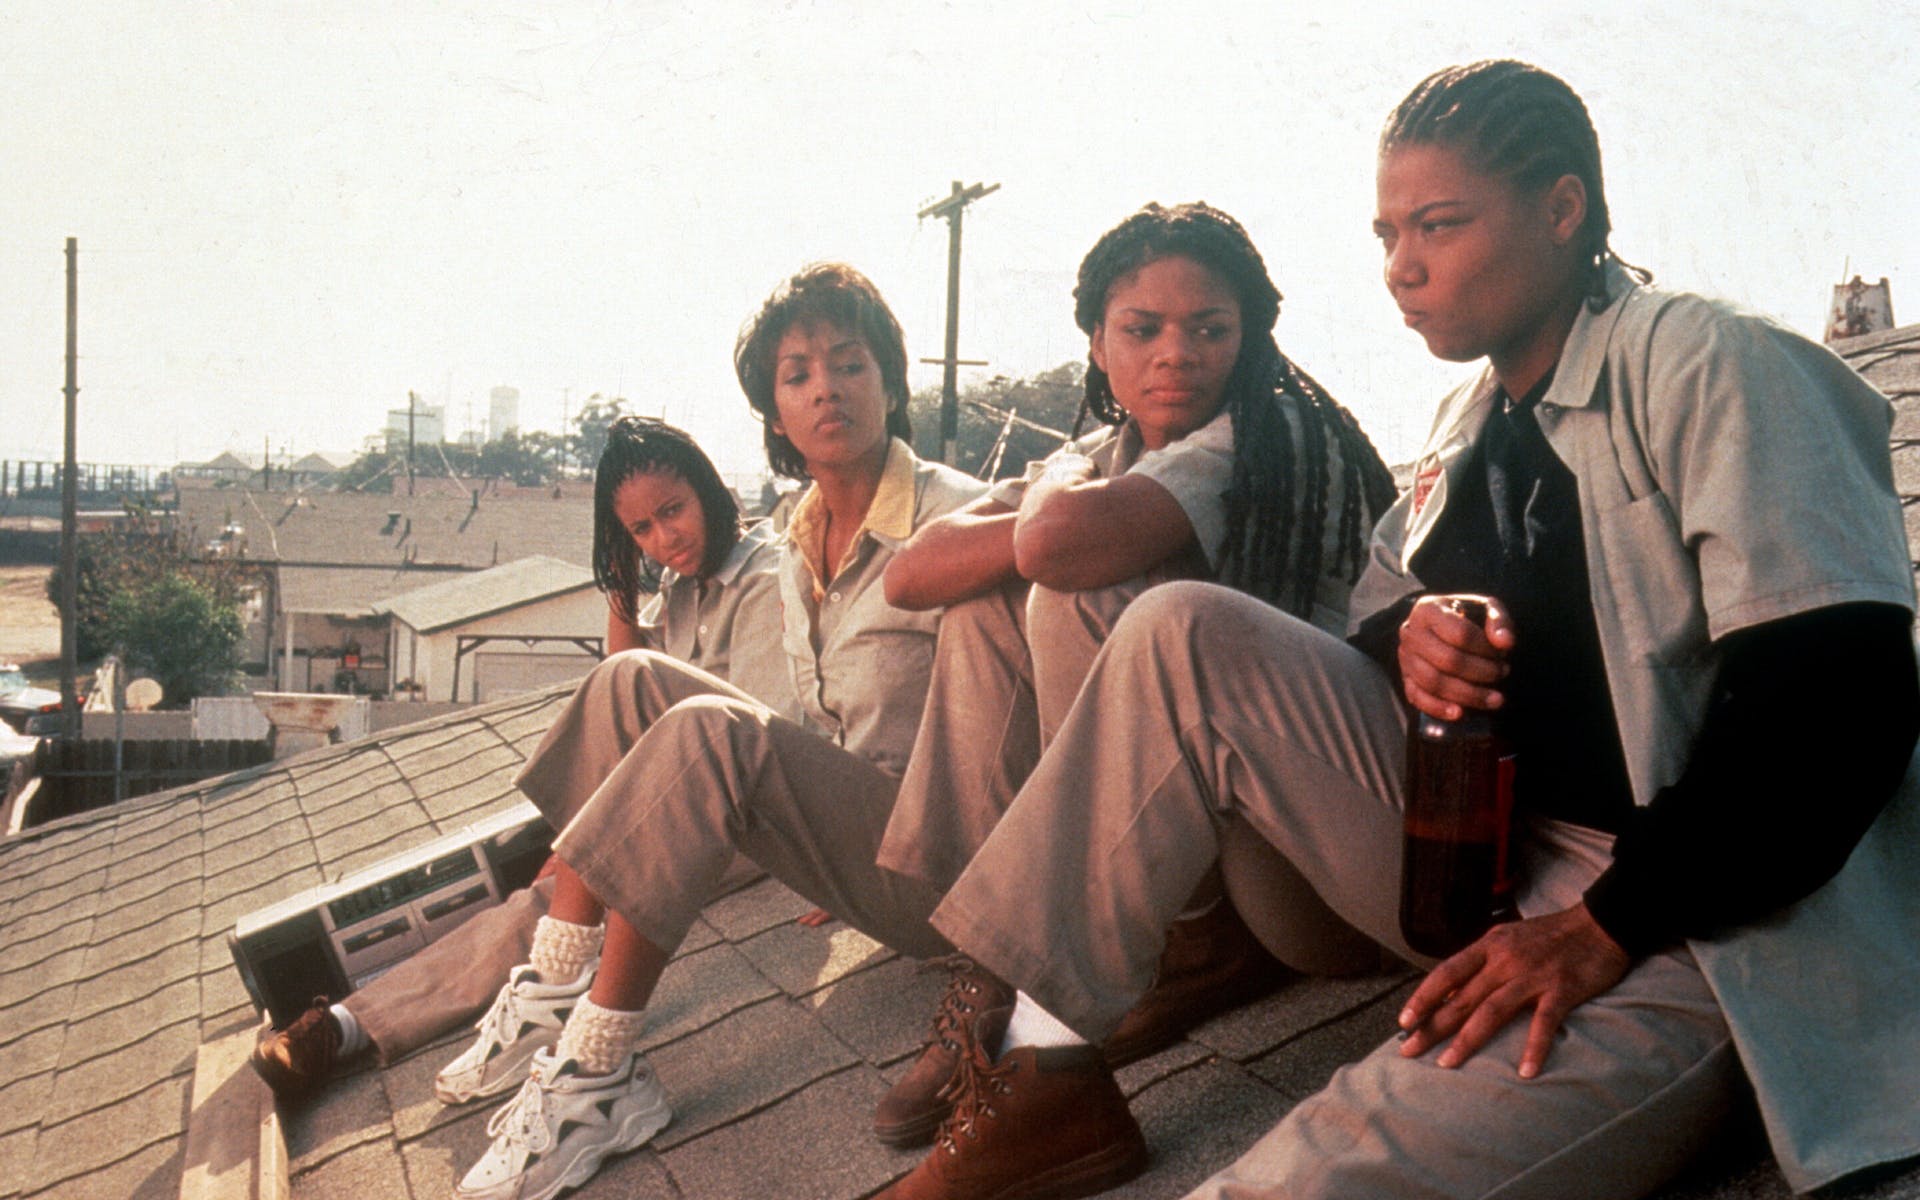 Four women in beige uniforms sit on a roof together, drinking beer and listening to music.